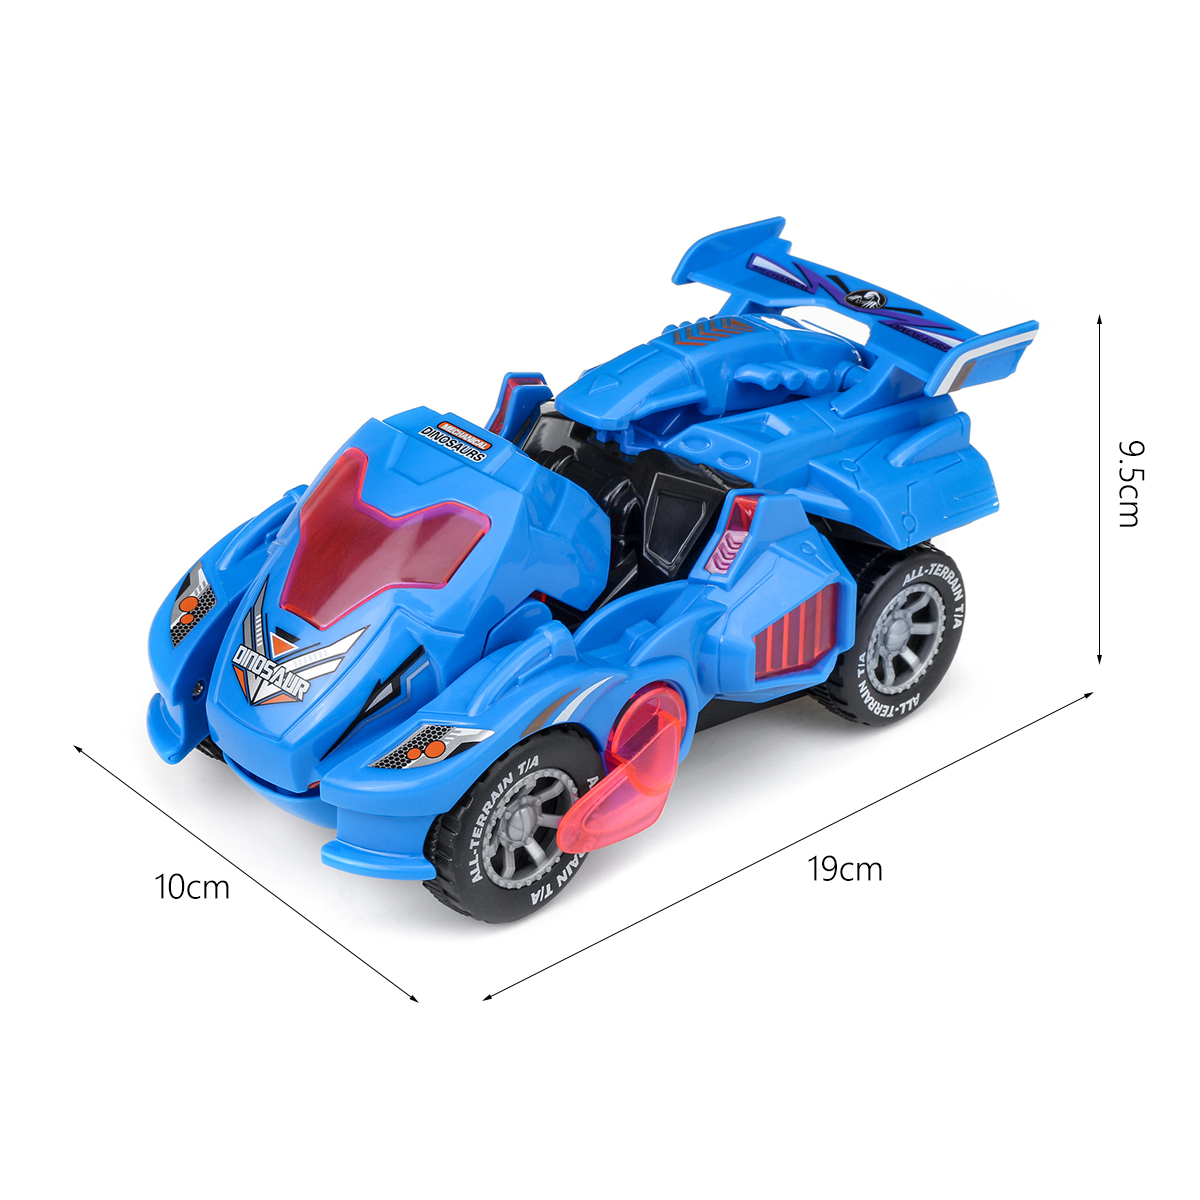 Creative-Dinosaur-Deformation-Toy-Car-Puzzle-Dinosaur-Electric-Toy-Car-Light-and-Music-Electric-Defo-1757309-16